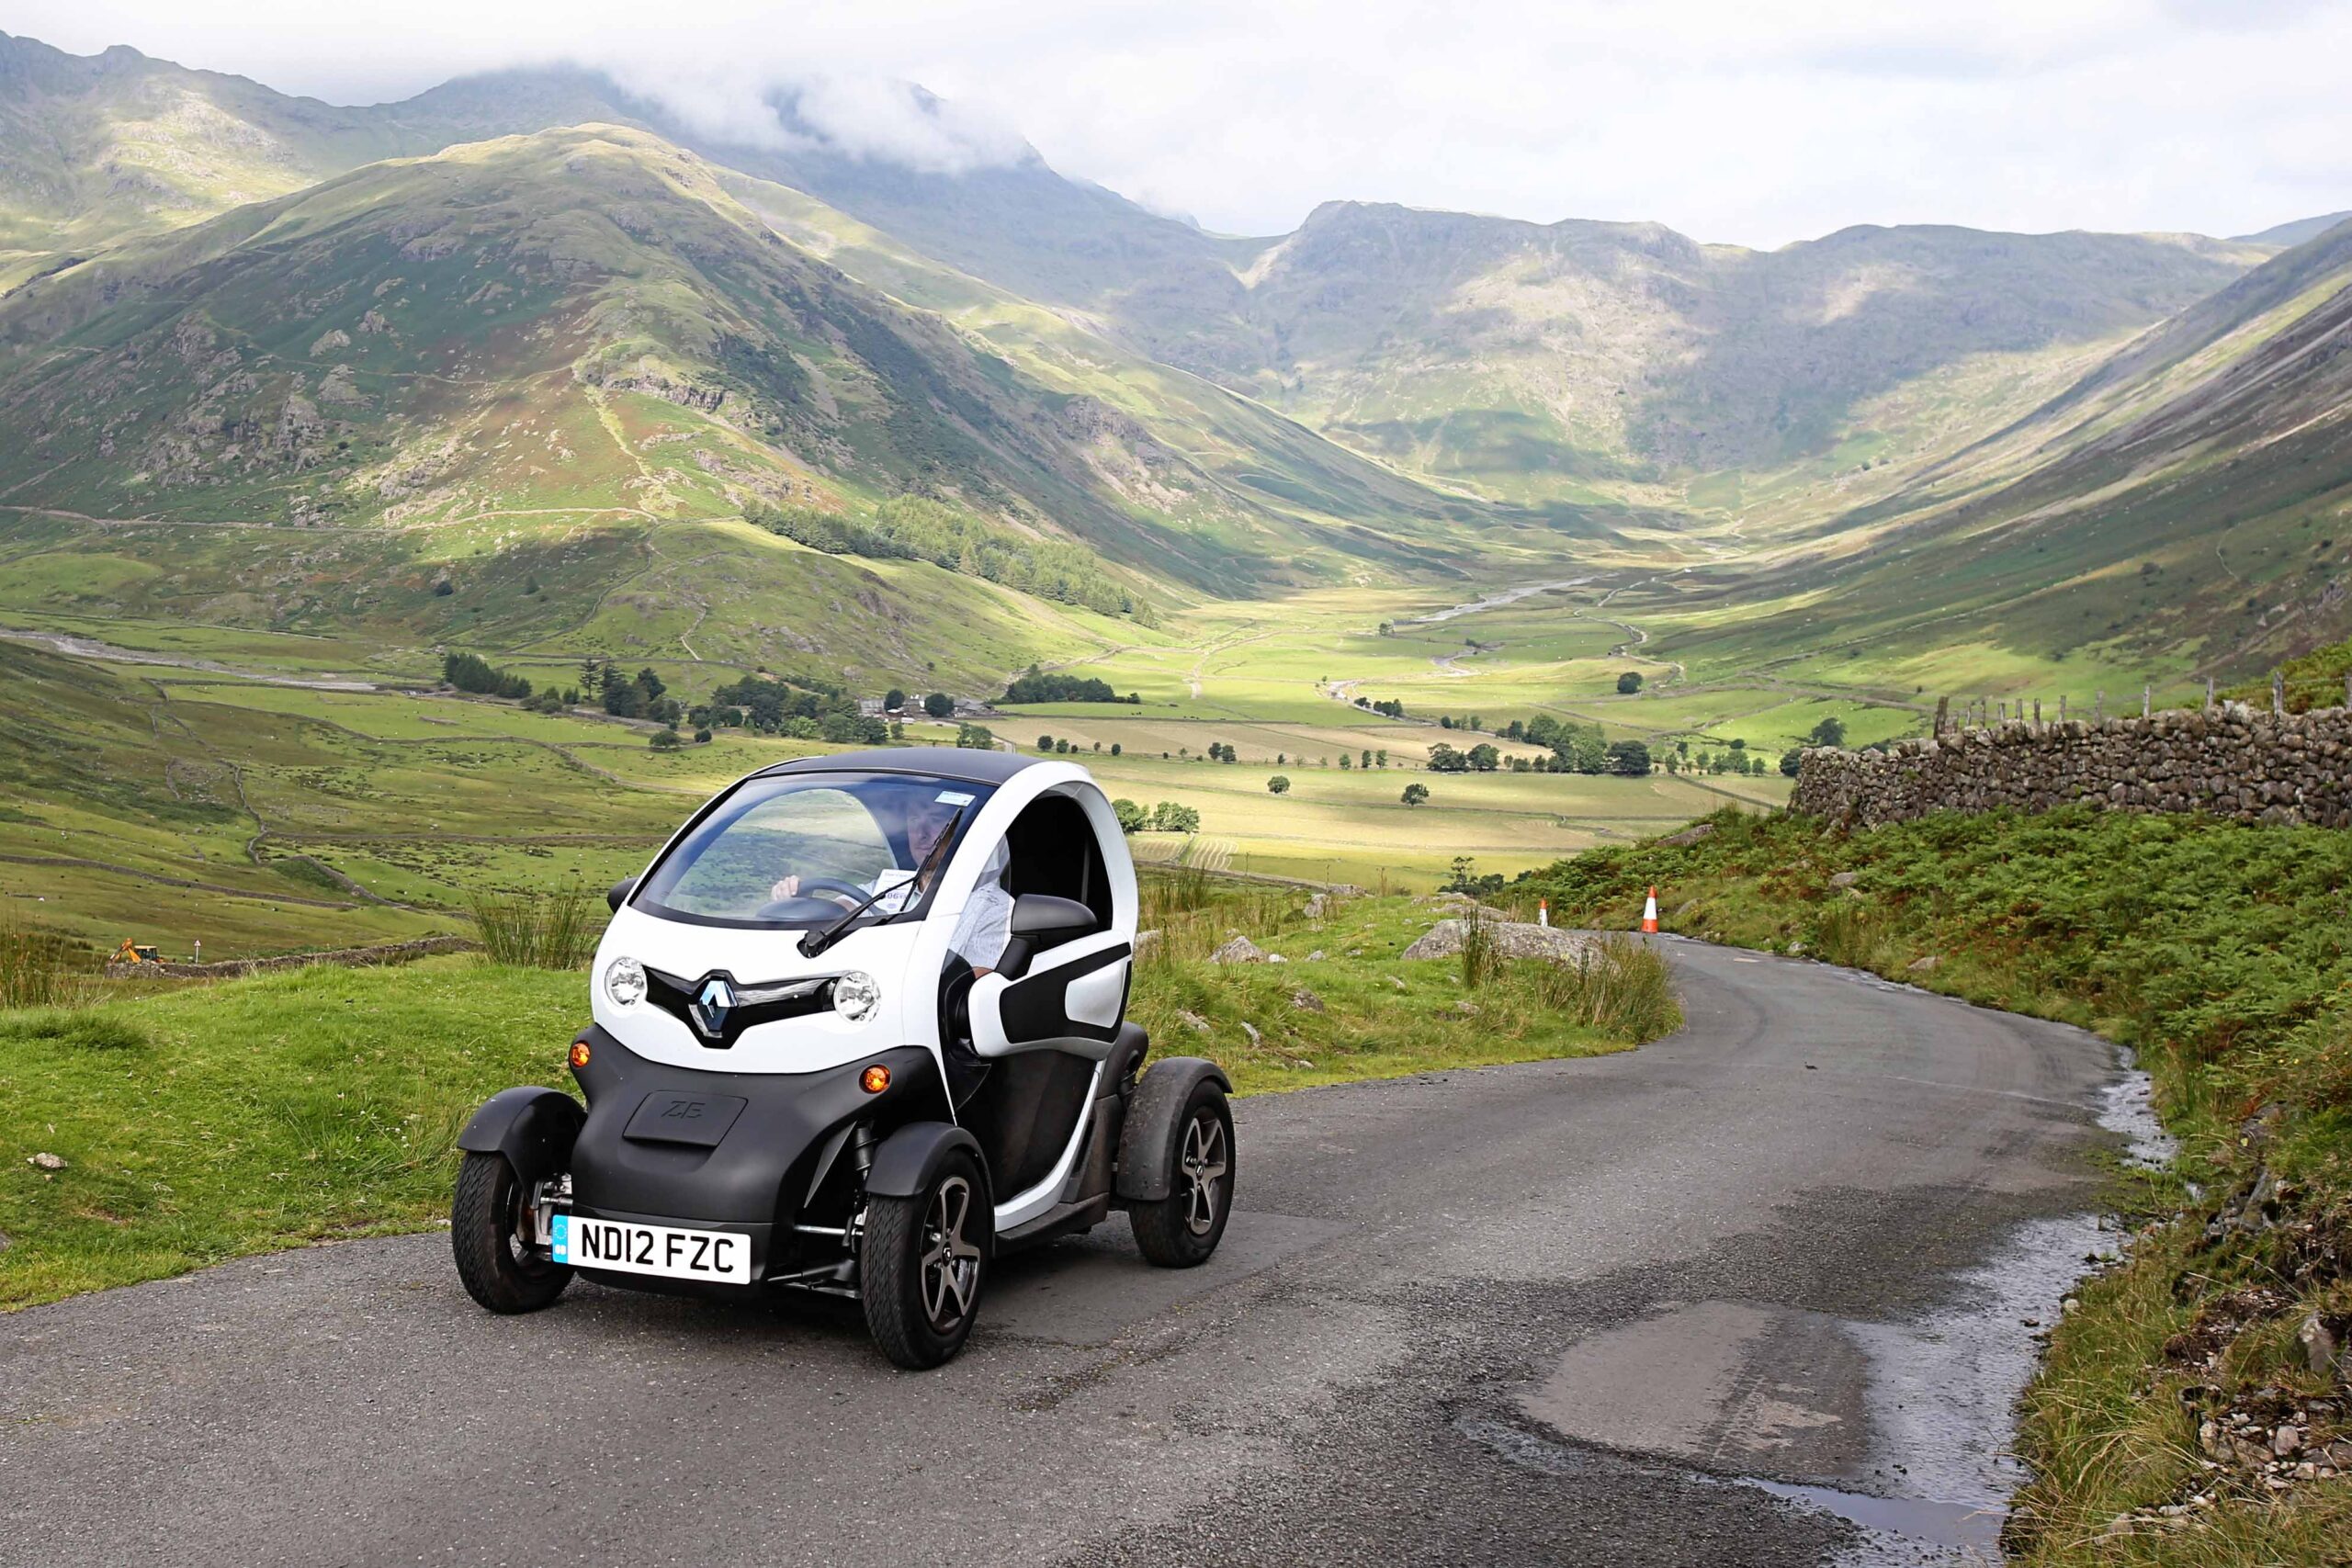 One of the Renault Twizzy electric cars available to visitors to The Lake District © www.stevenbarber.com